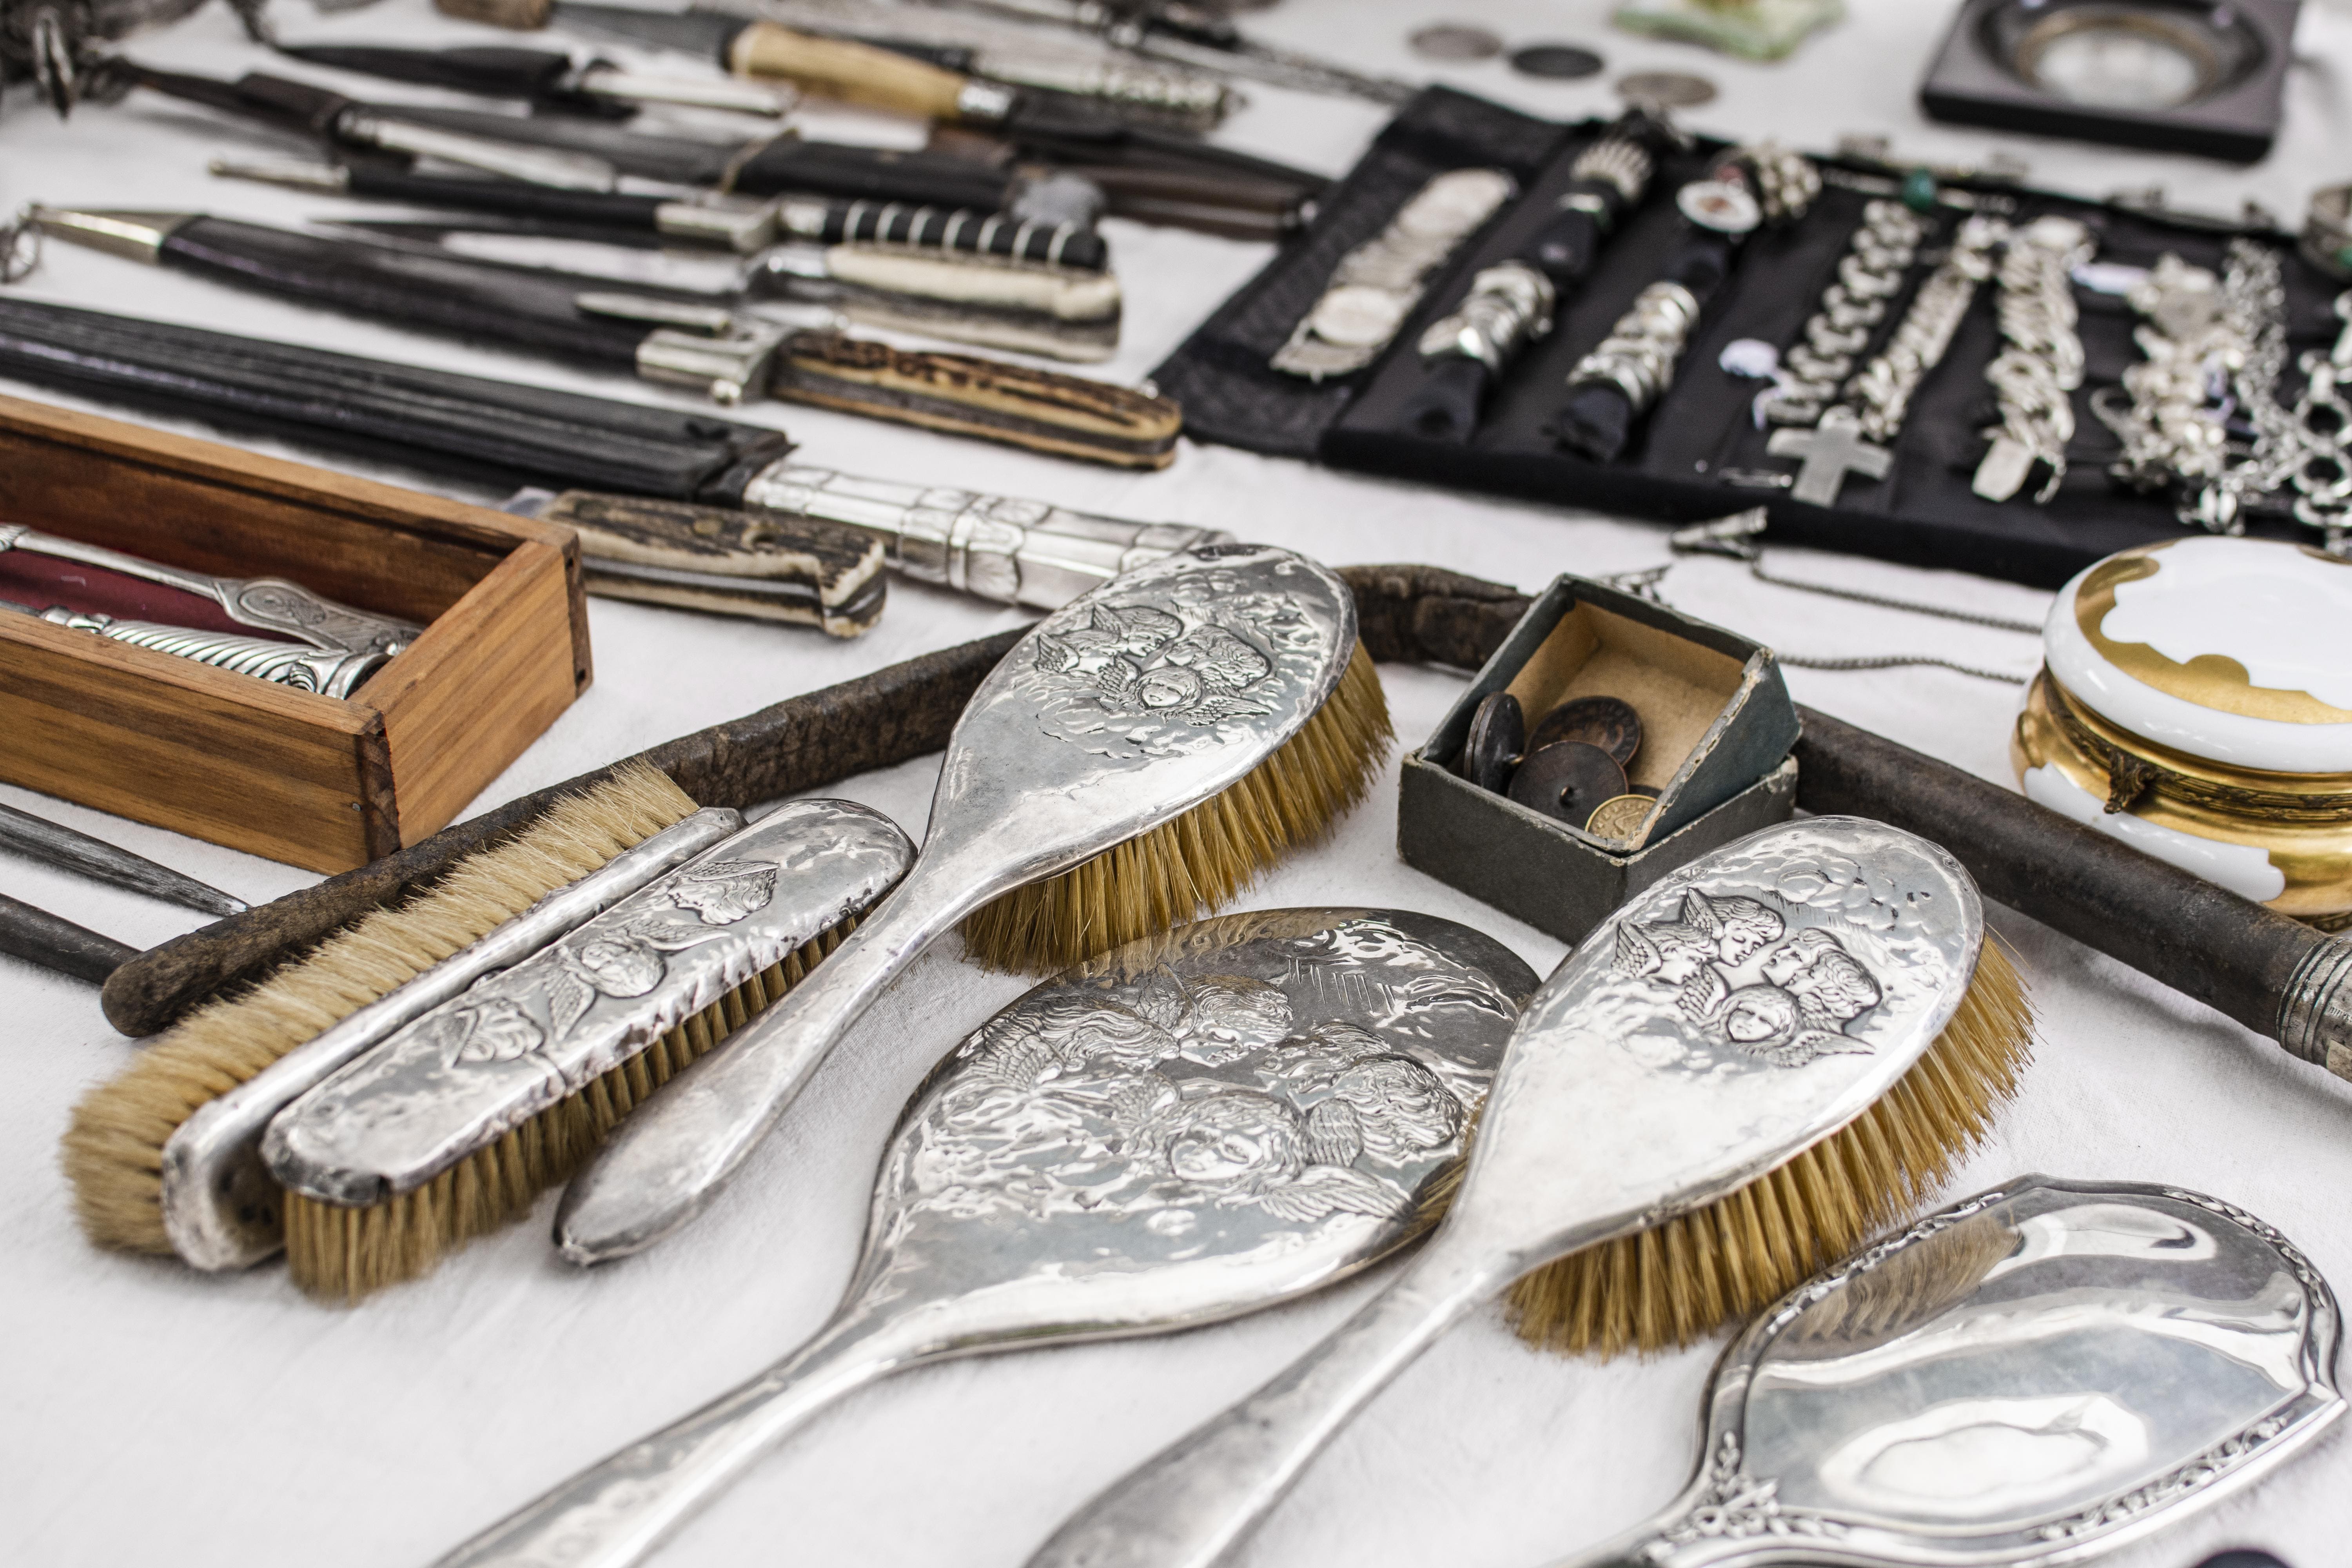 Brushes for preserving and cleaning jewelry pieces, ensuring their pristine condition